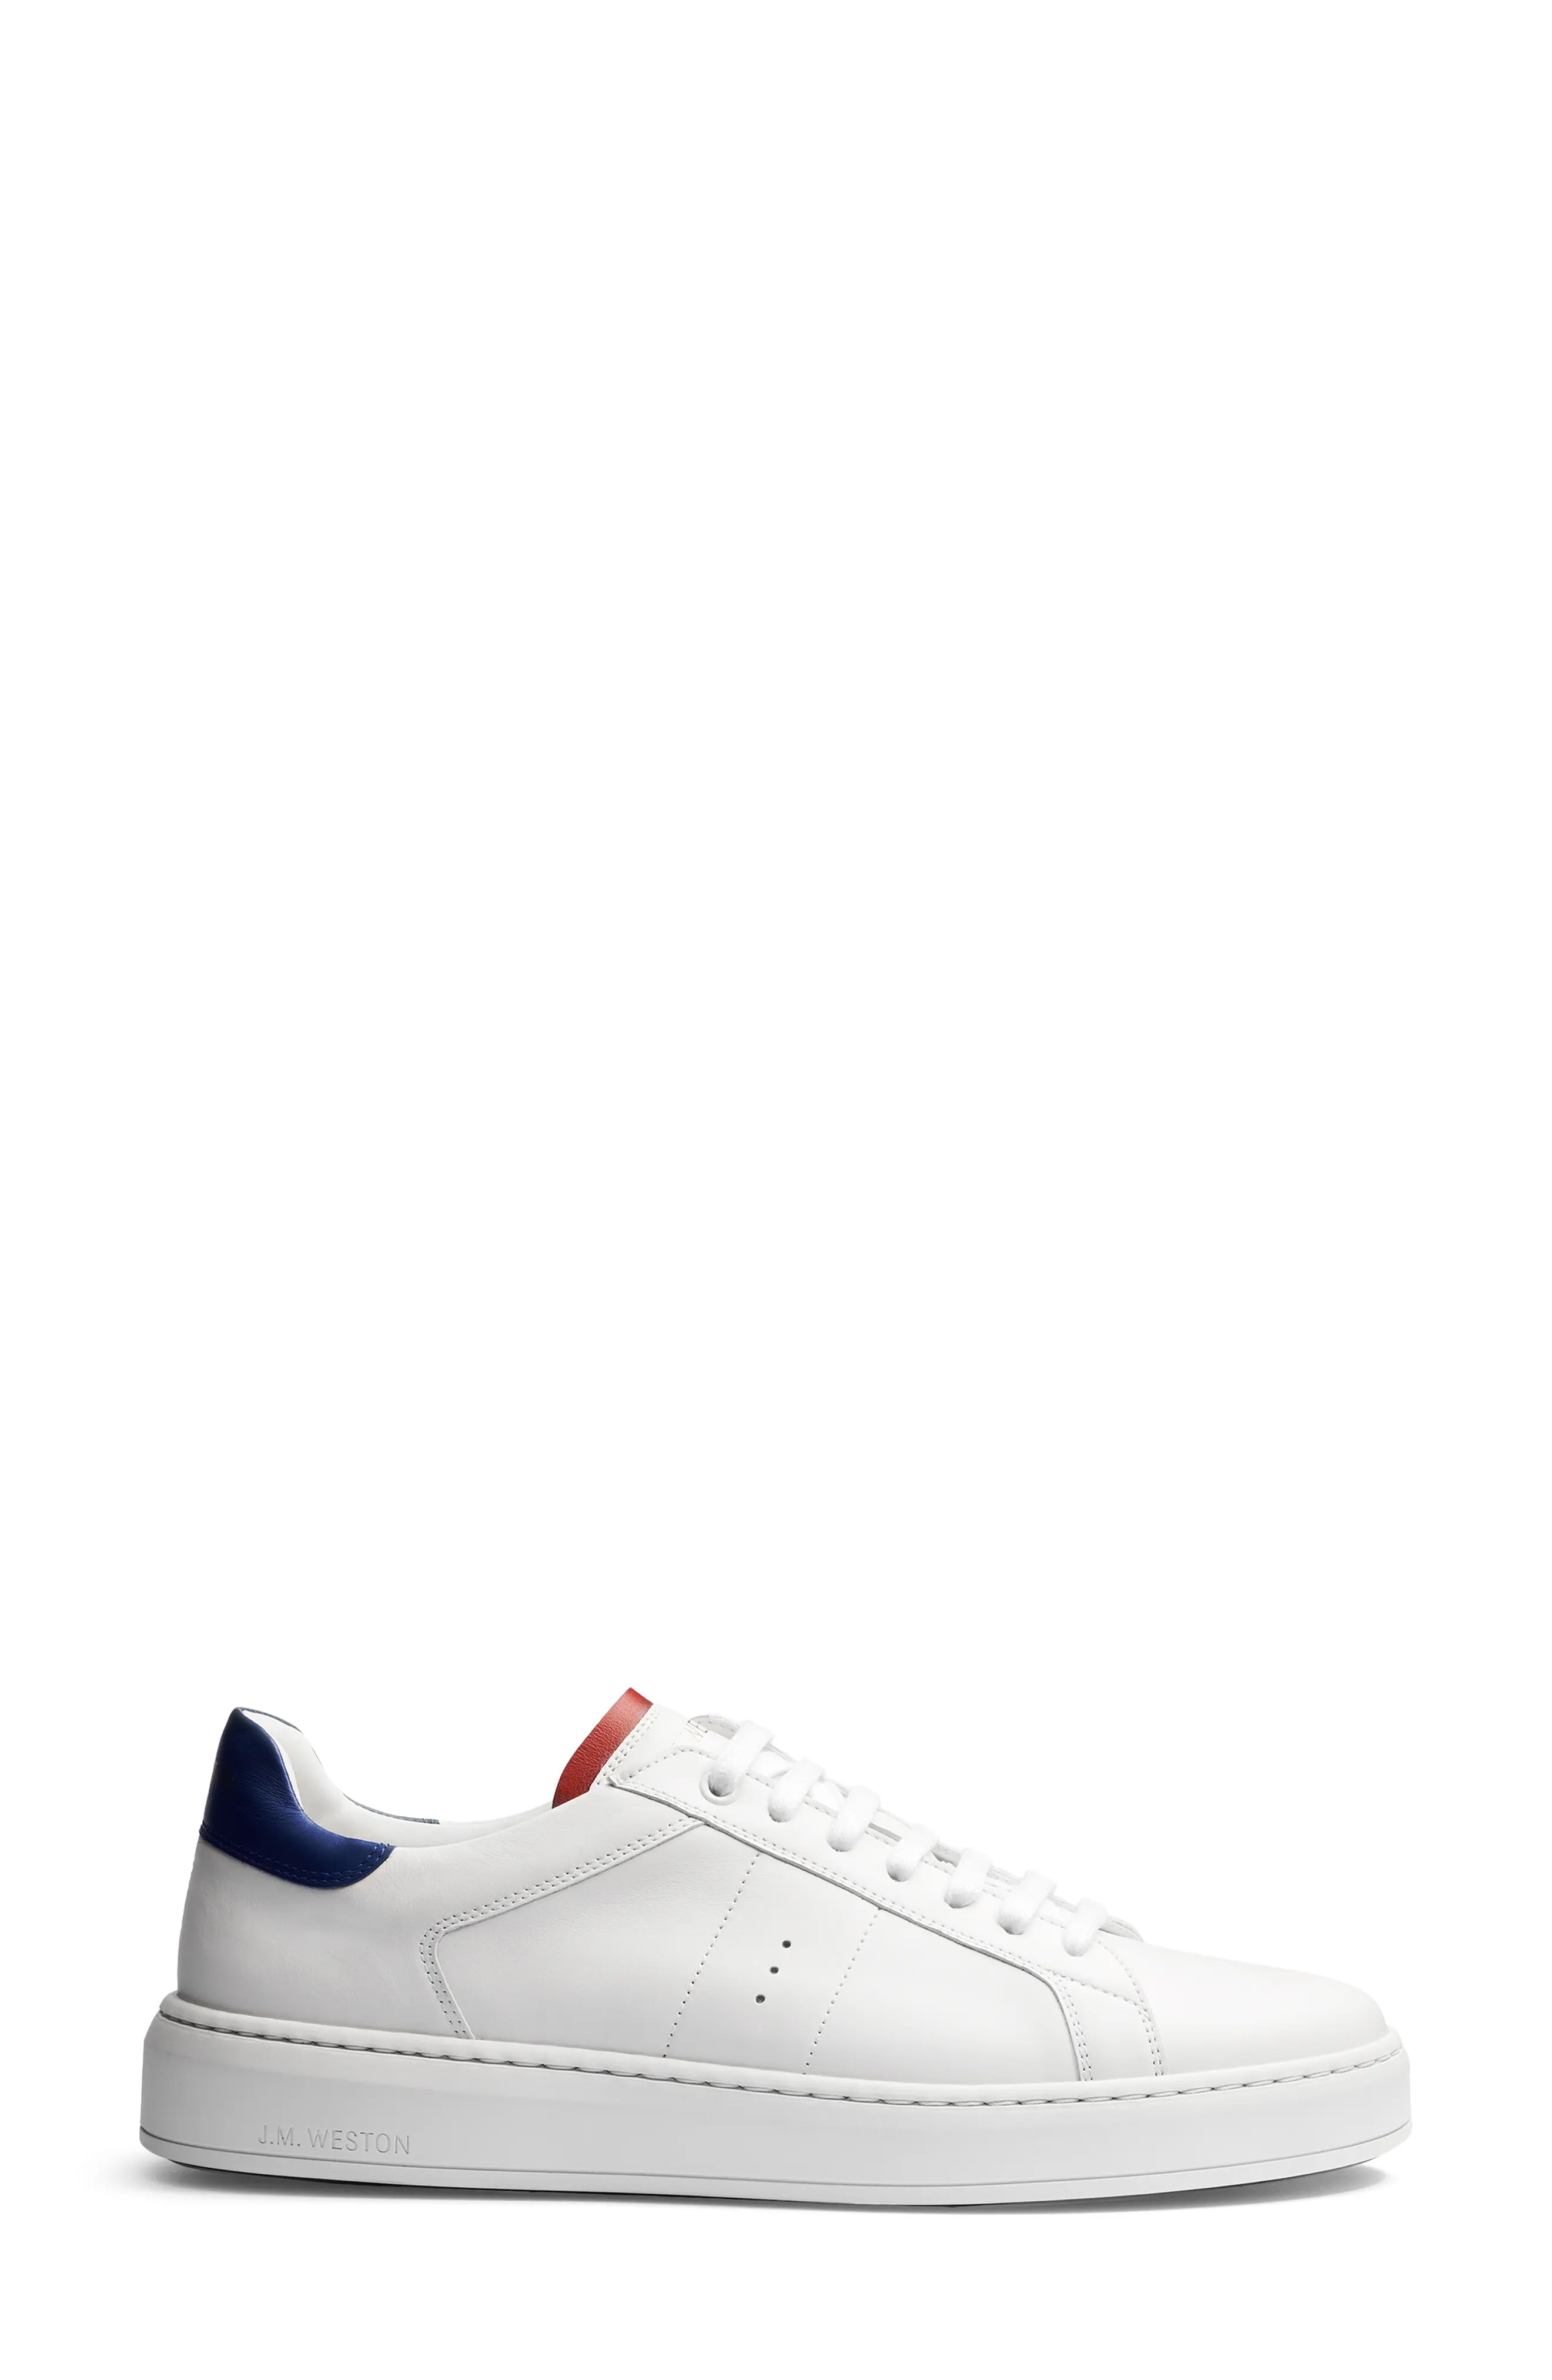 On Time Sneaker in Whte /Red /Blue - 2